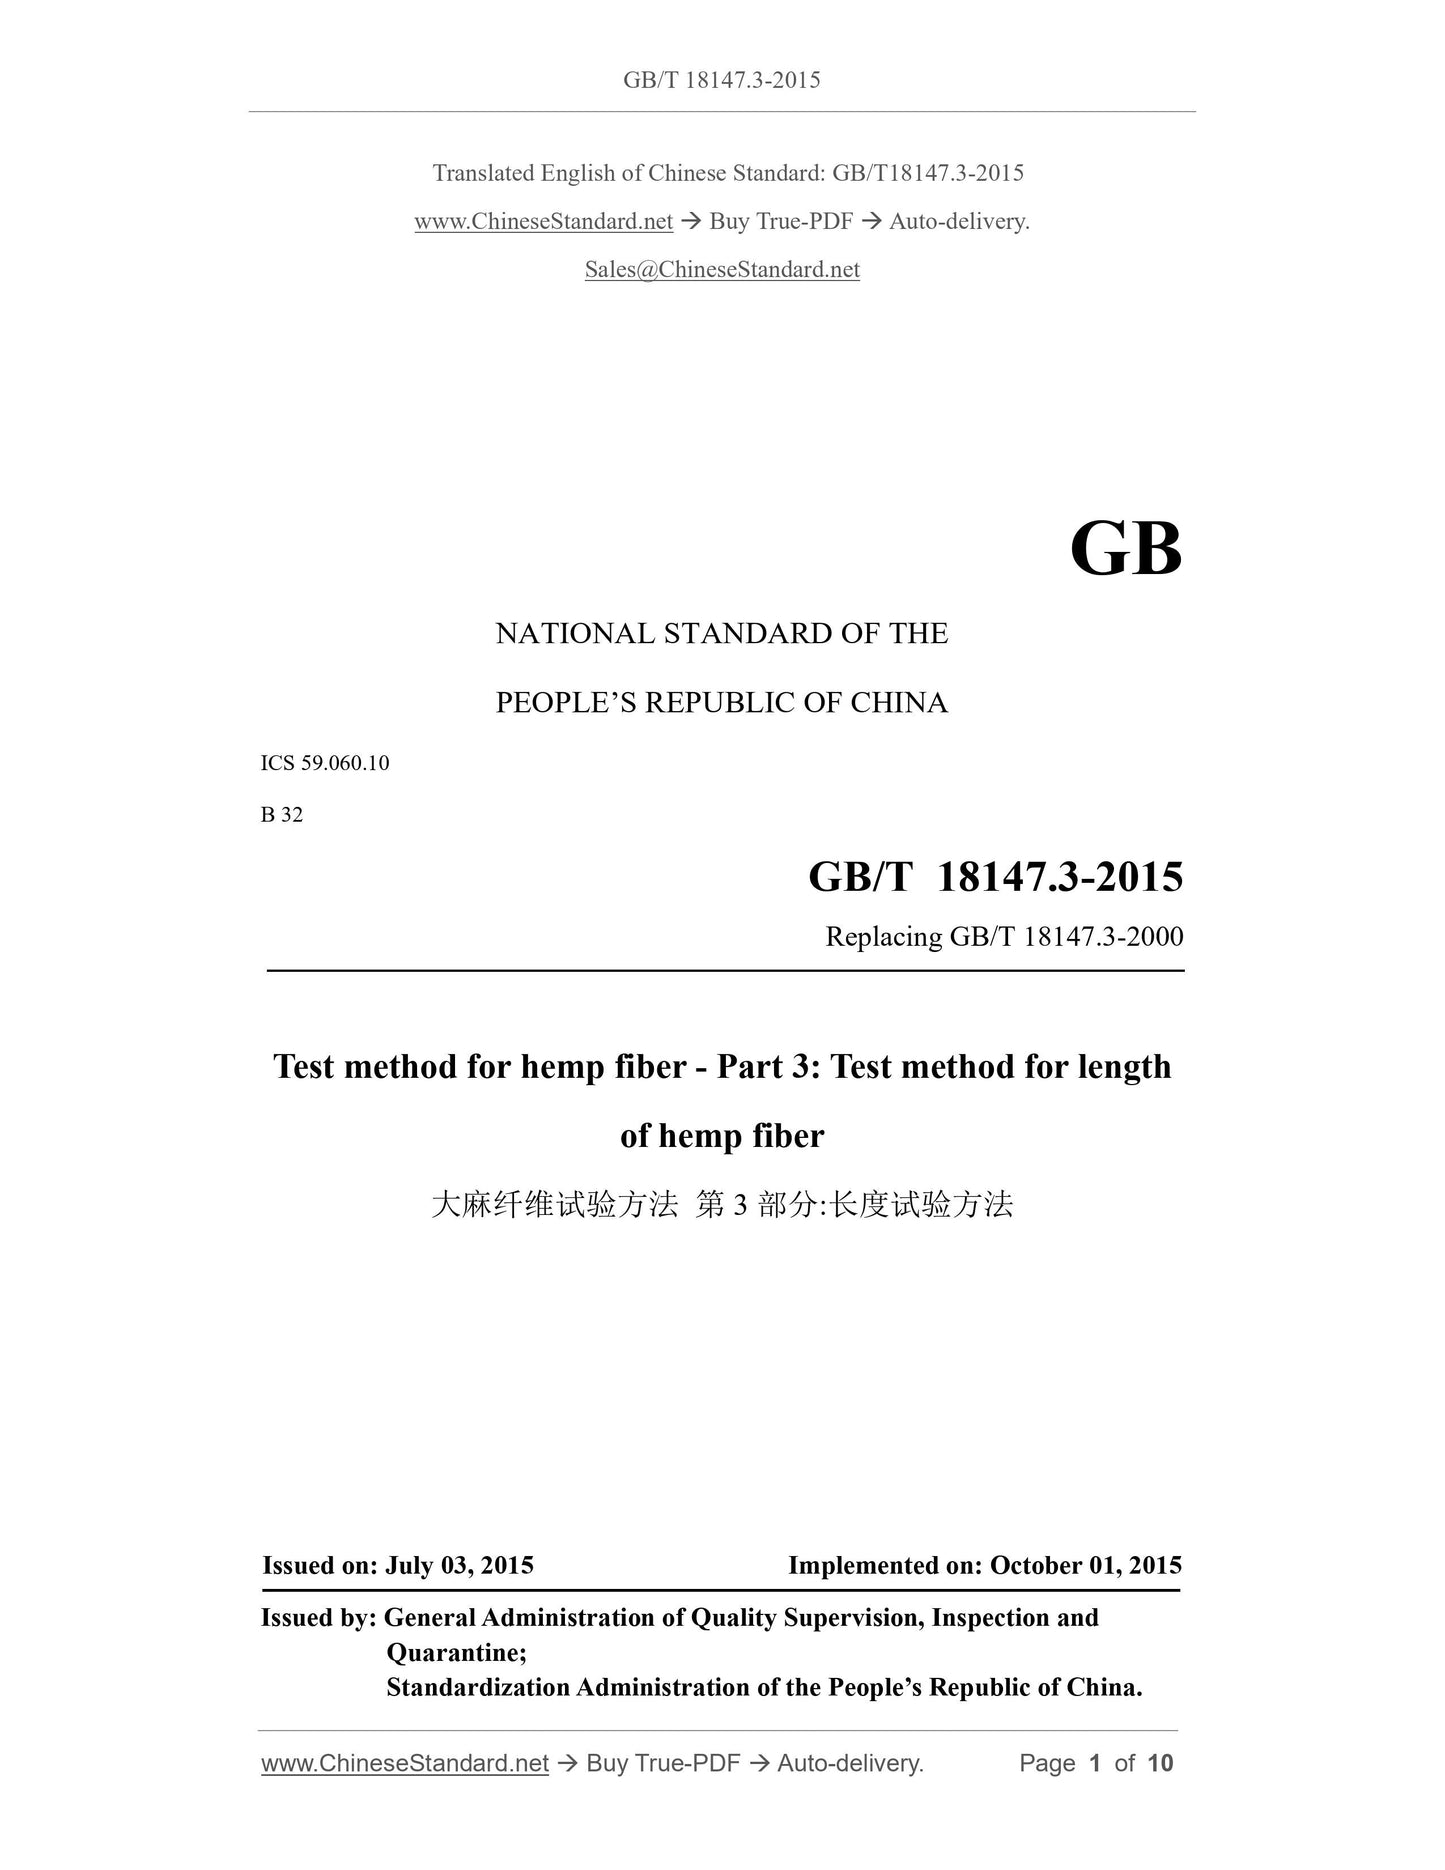 GB/T 18147.3-2015 Page 1